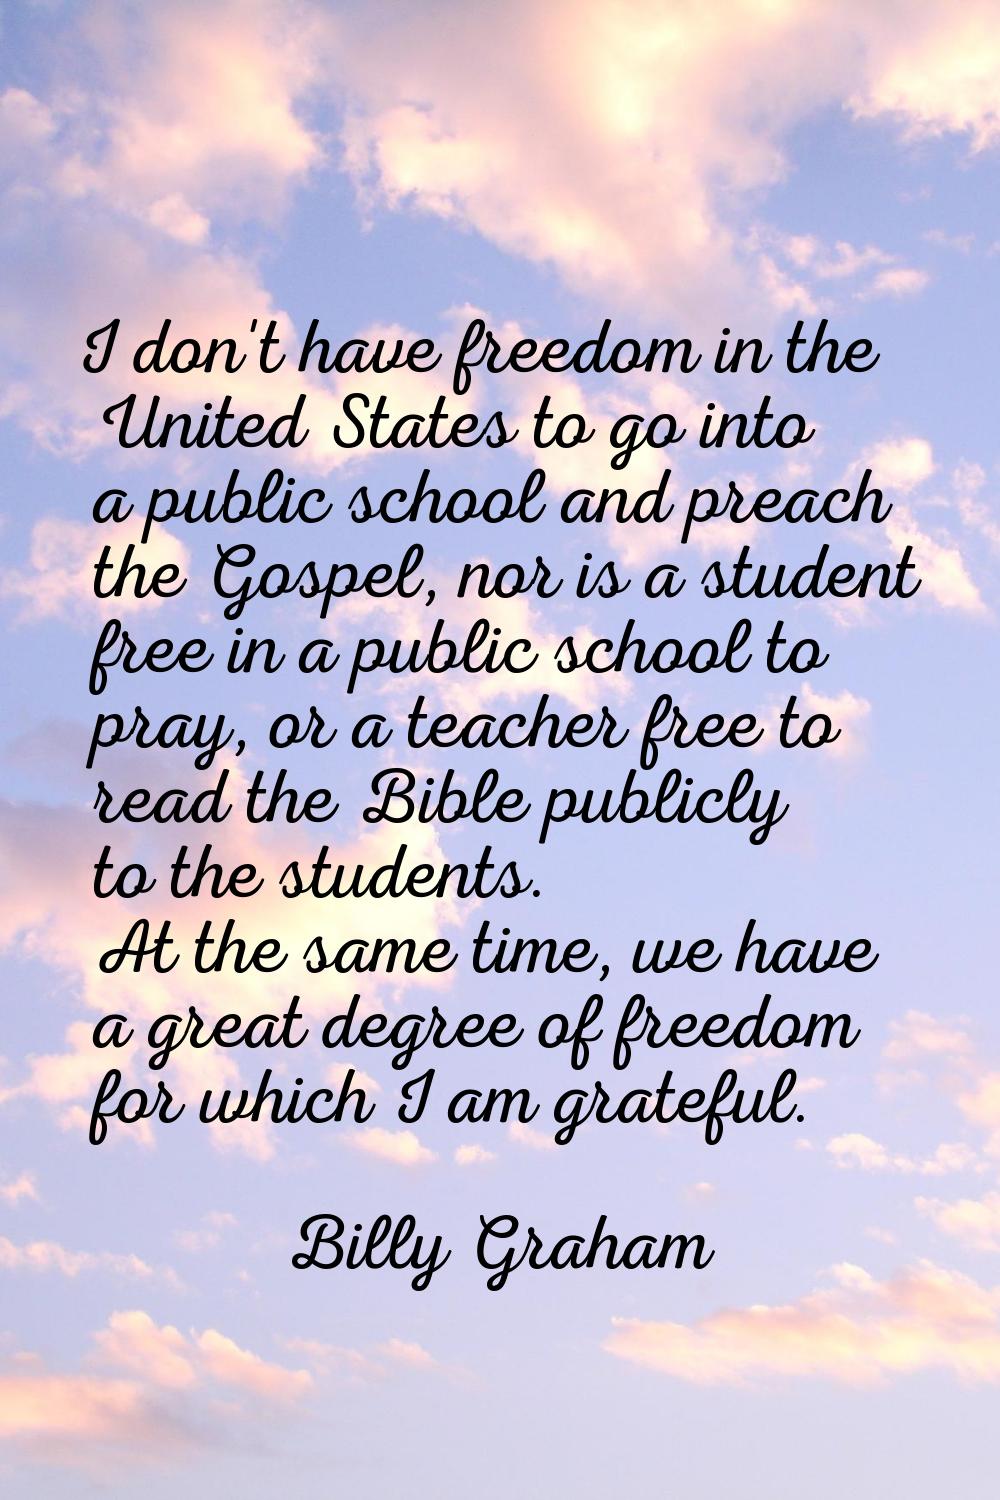 I don't have freedom in the United States to go into a public school and preach the Gospel, nor is 